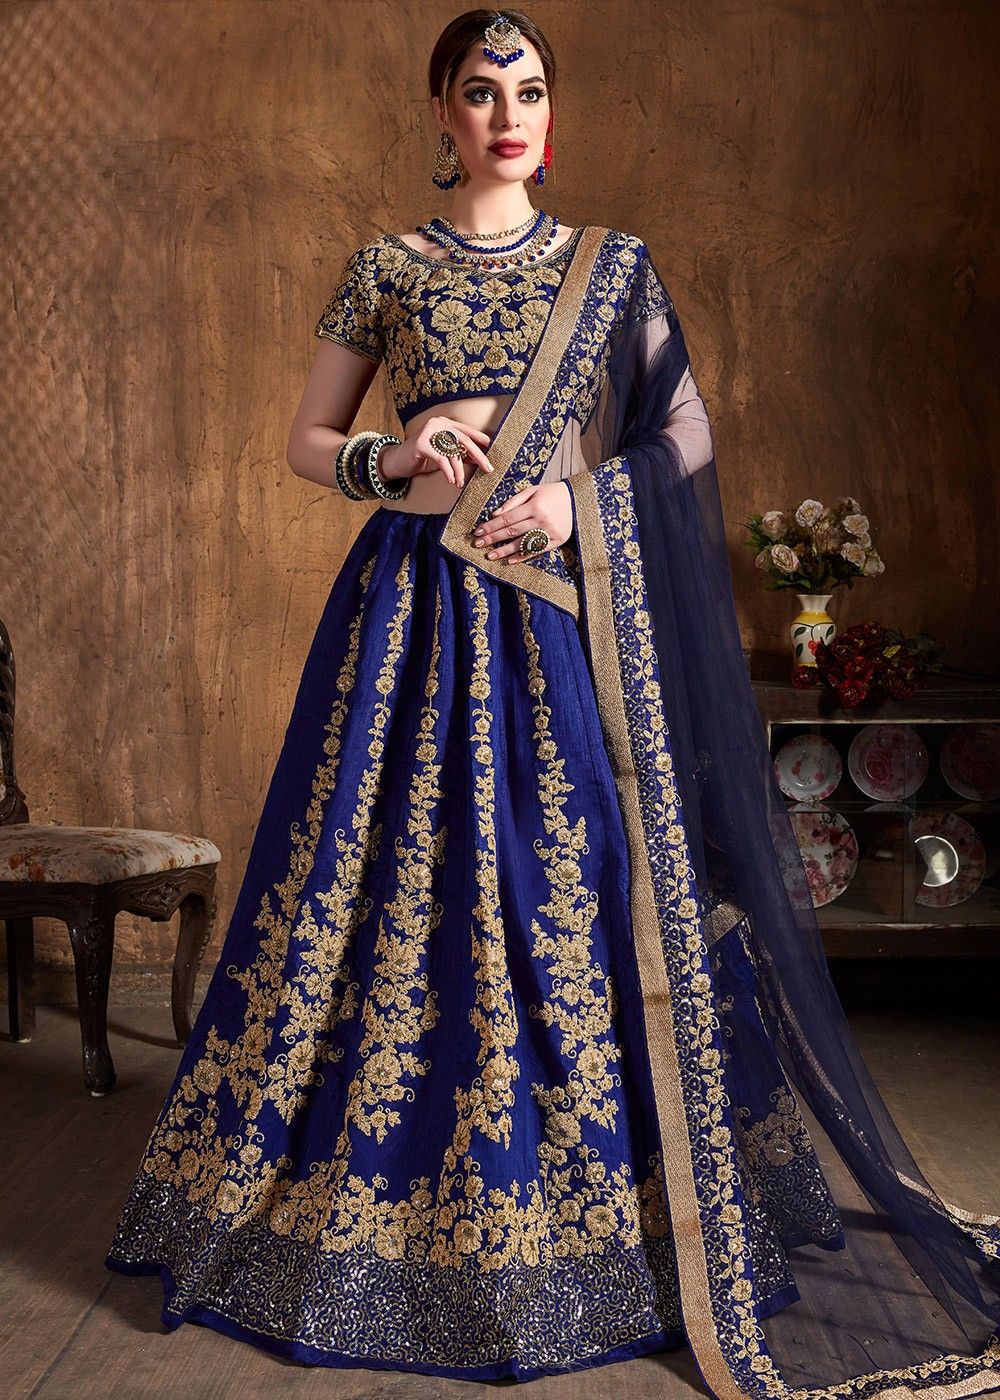 Blue Bridal Lehenga Choli for Women USA, Wedding, Reception, Indian Wedding  and Party Wear Heavy Silk With Embroidery Work for Women. - Etsy | Gown party  wear, Bridal lehenga choli, Bridal lehenga